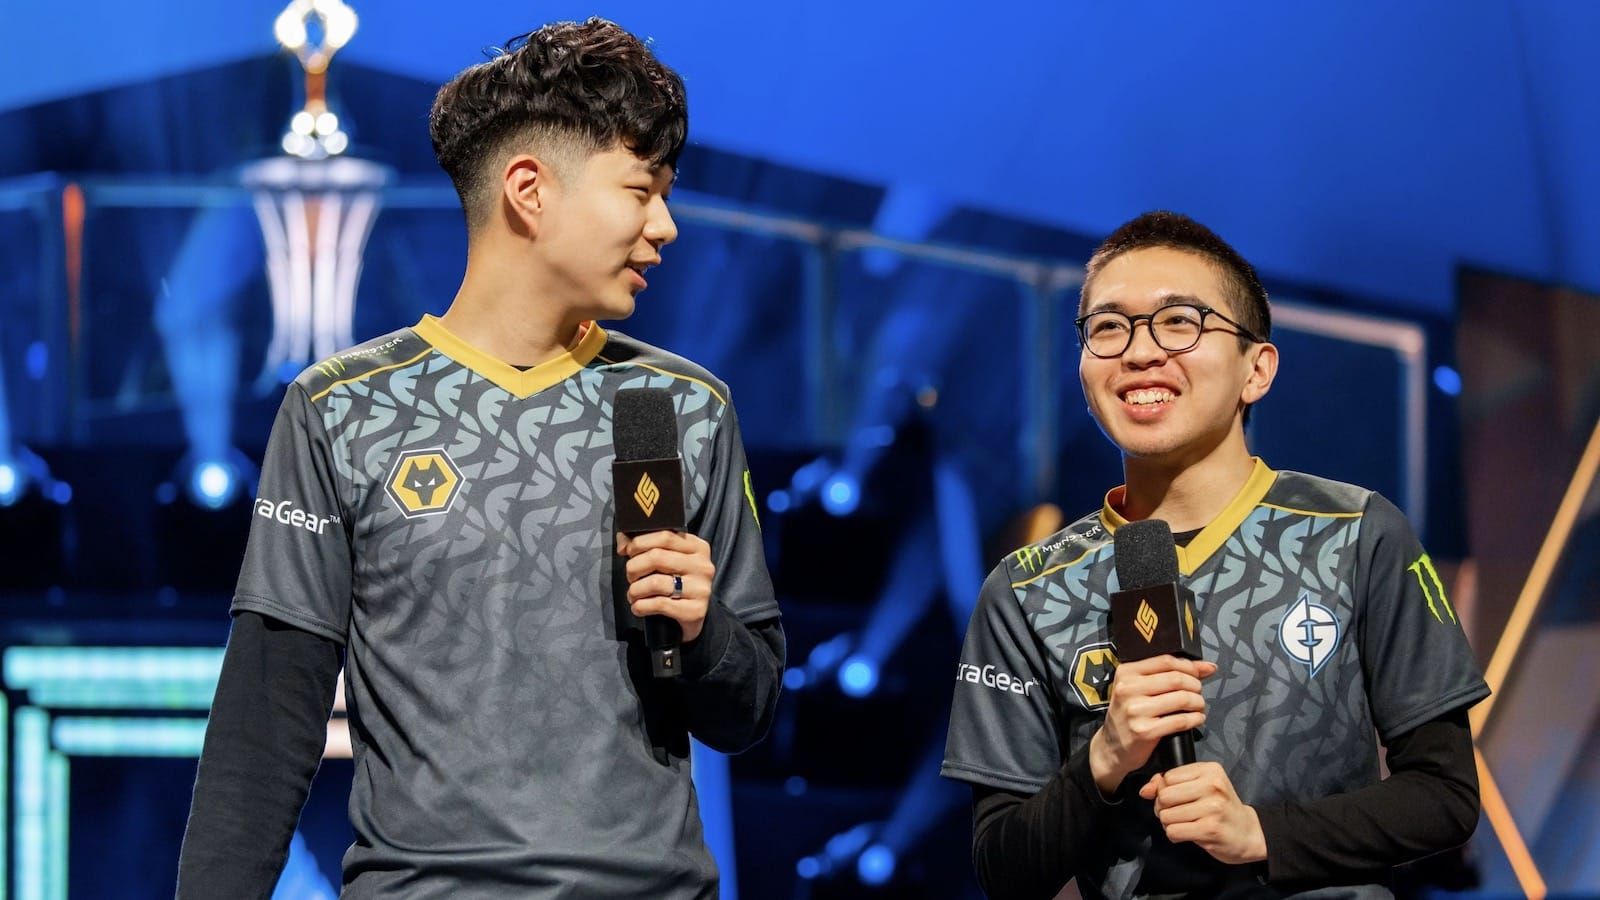 Evil Geniuses League of Legends players jojopyun and Danny holding microphones as they get interviewed on stage